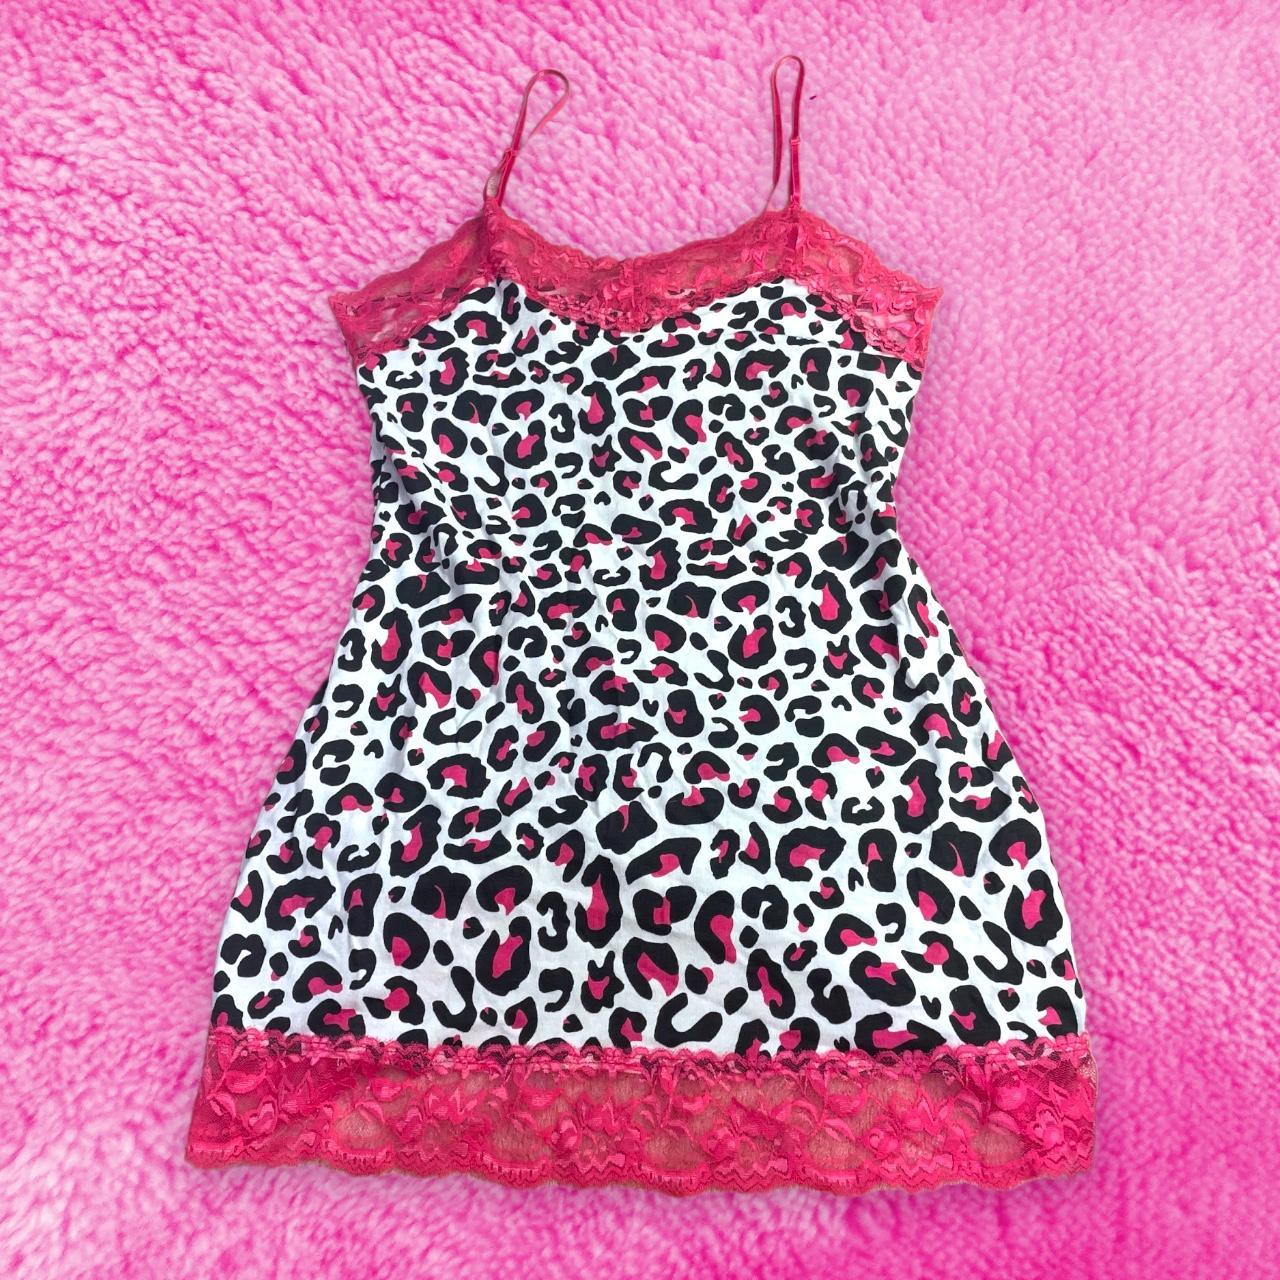 Product Image 1 - Pink Cheetah Print Lace Camisole